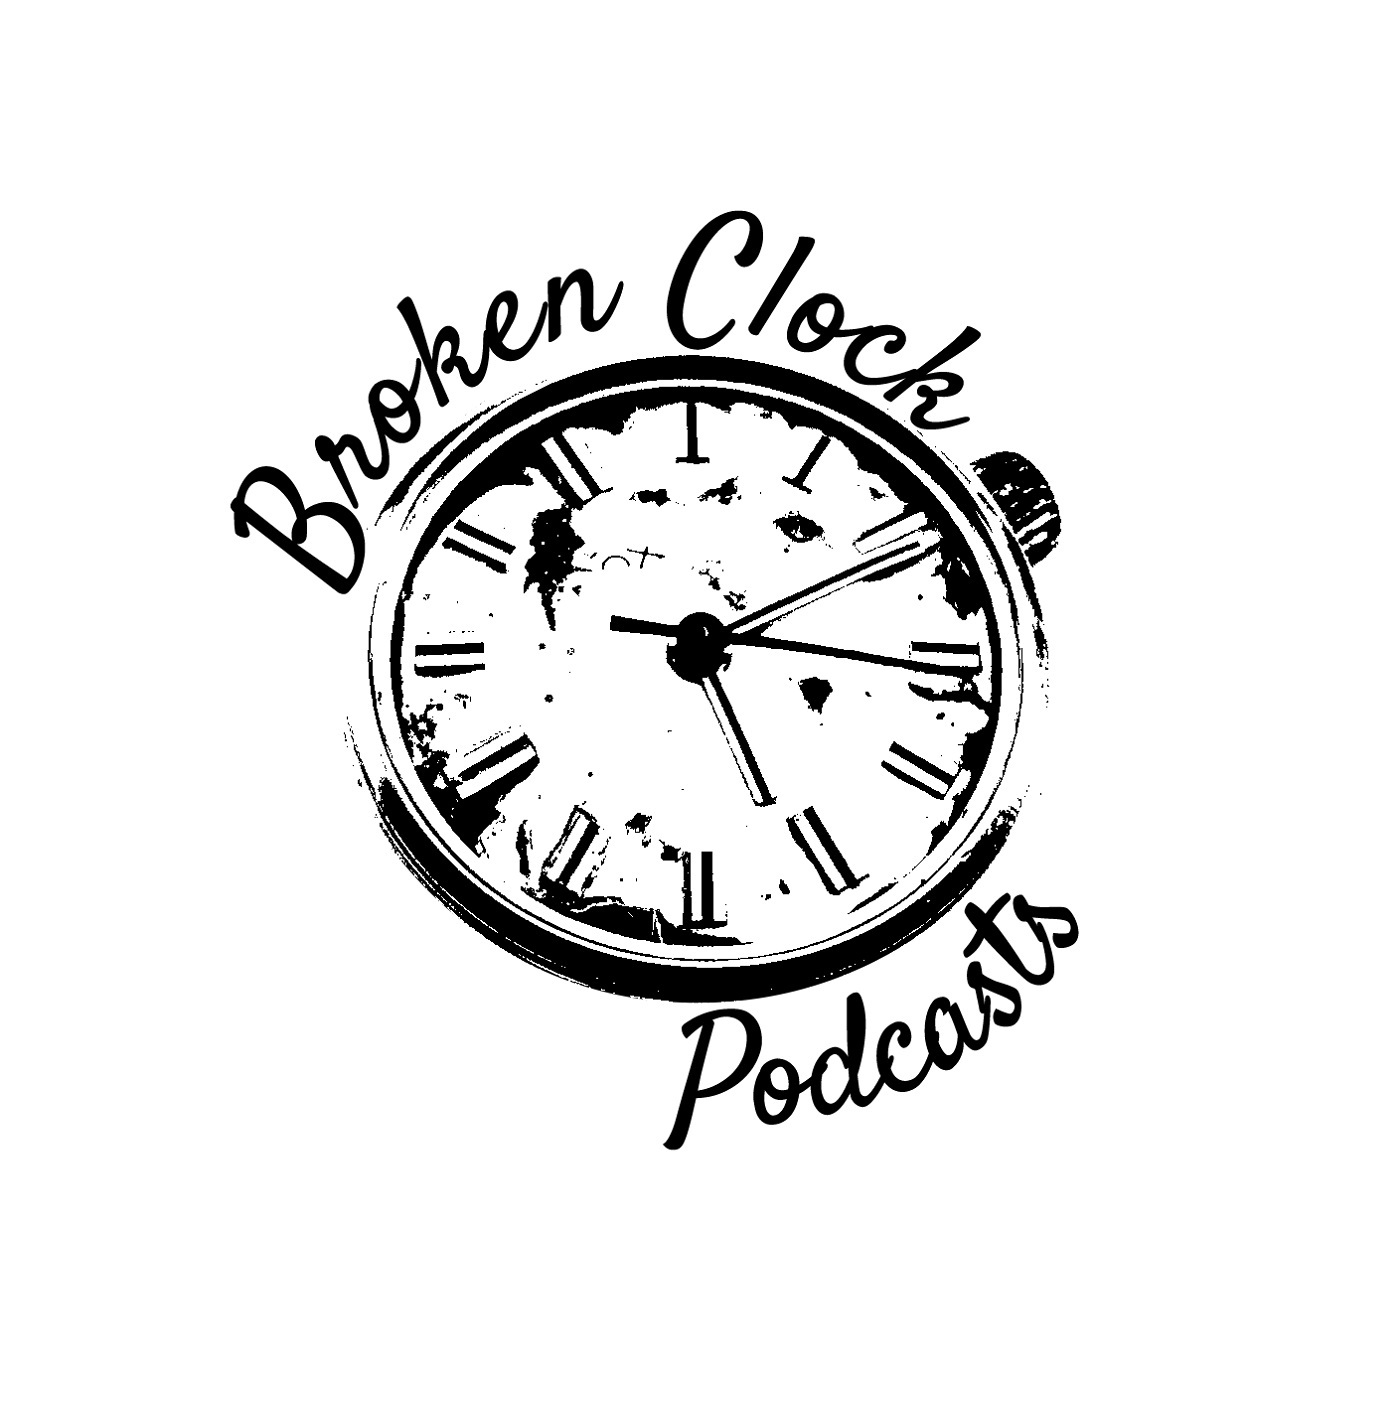 Broken Clock Gamescast Episode 41 - The Game Awards and PSX